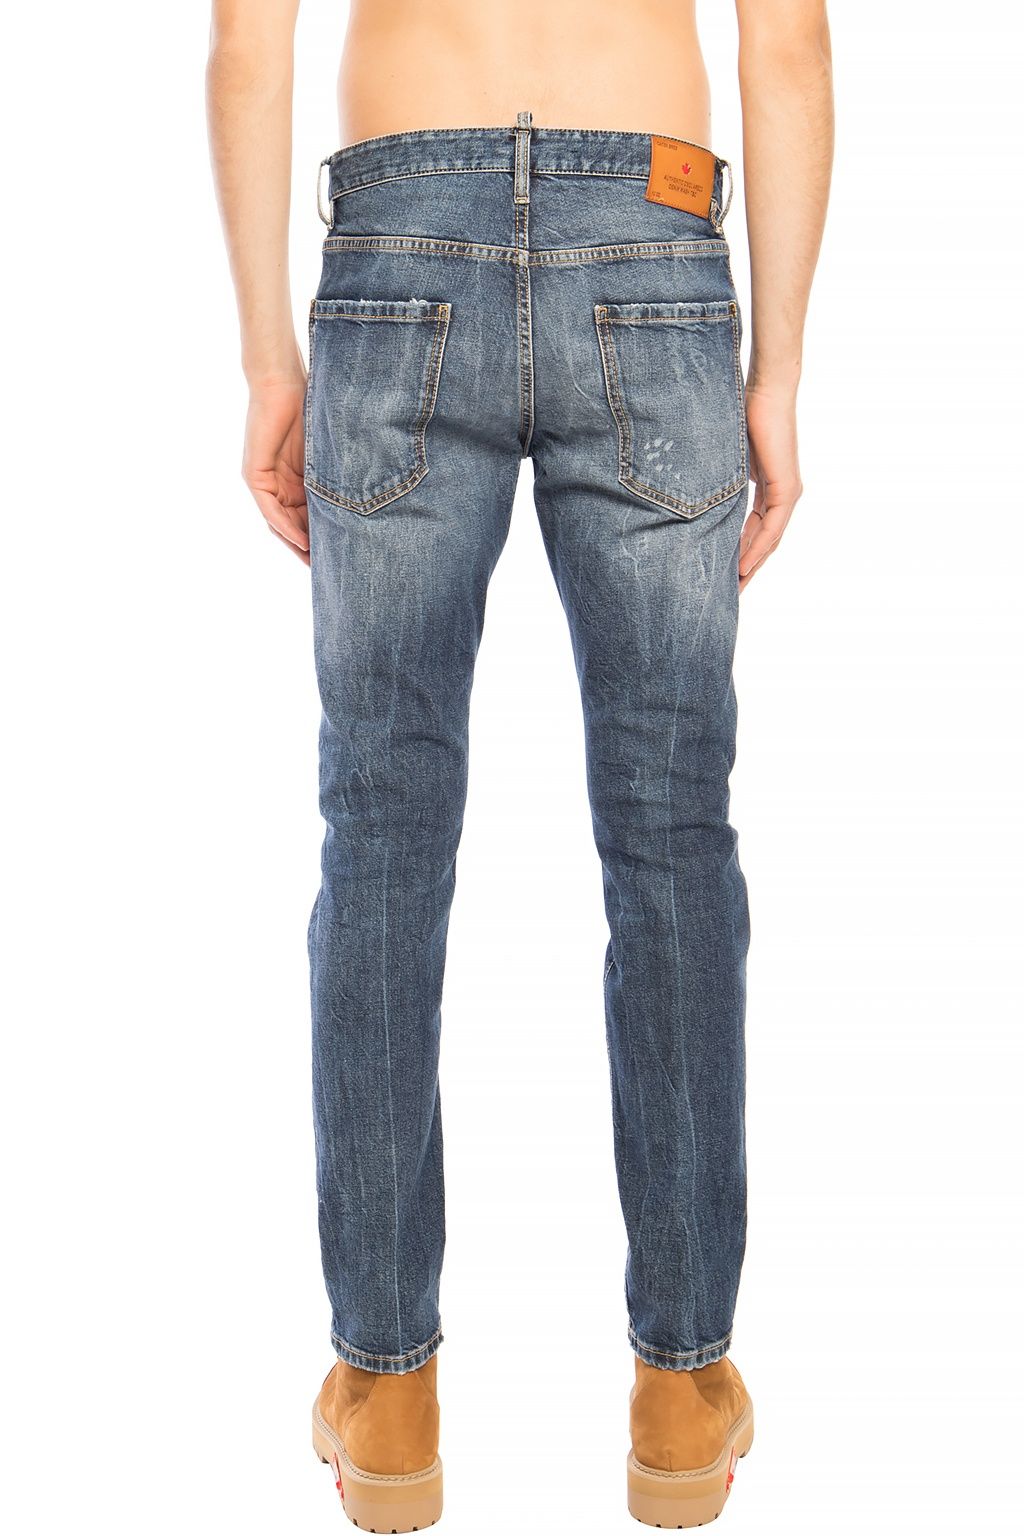 Dsquared² Men's 'Cool Guy' Blue Cotton Distressed Jeans - Designed by Dsquared² Available to Buy at a Discounted Price on Moon Behind The Hill Online Designer Discount Store